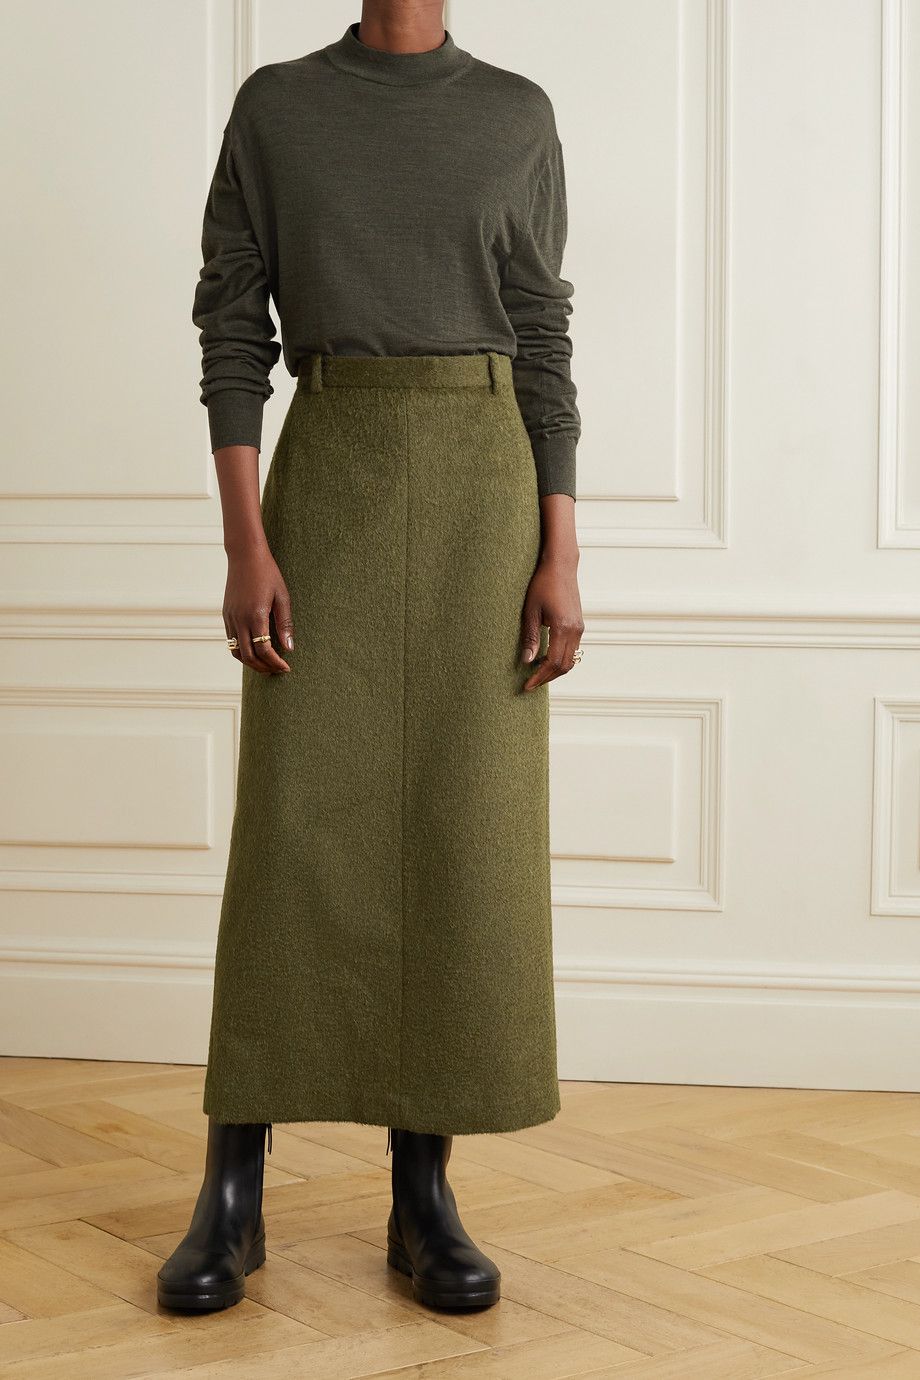 Cozy Wool Skirts for Cold Weather